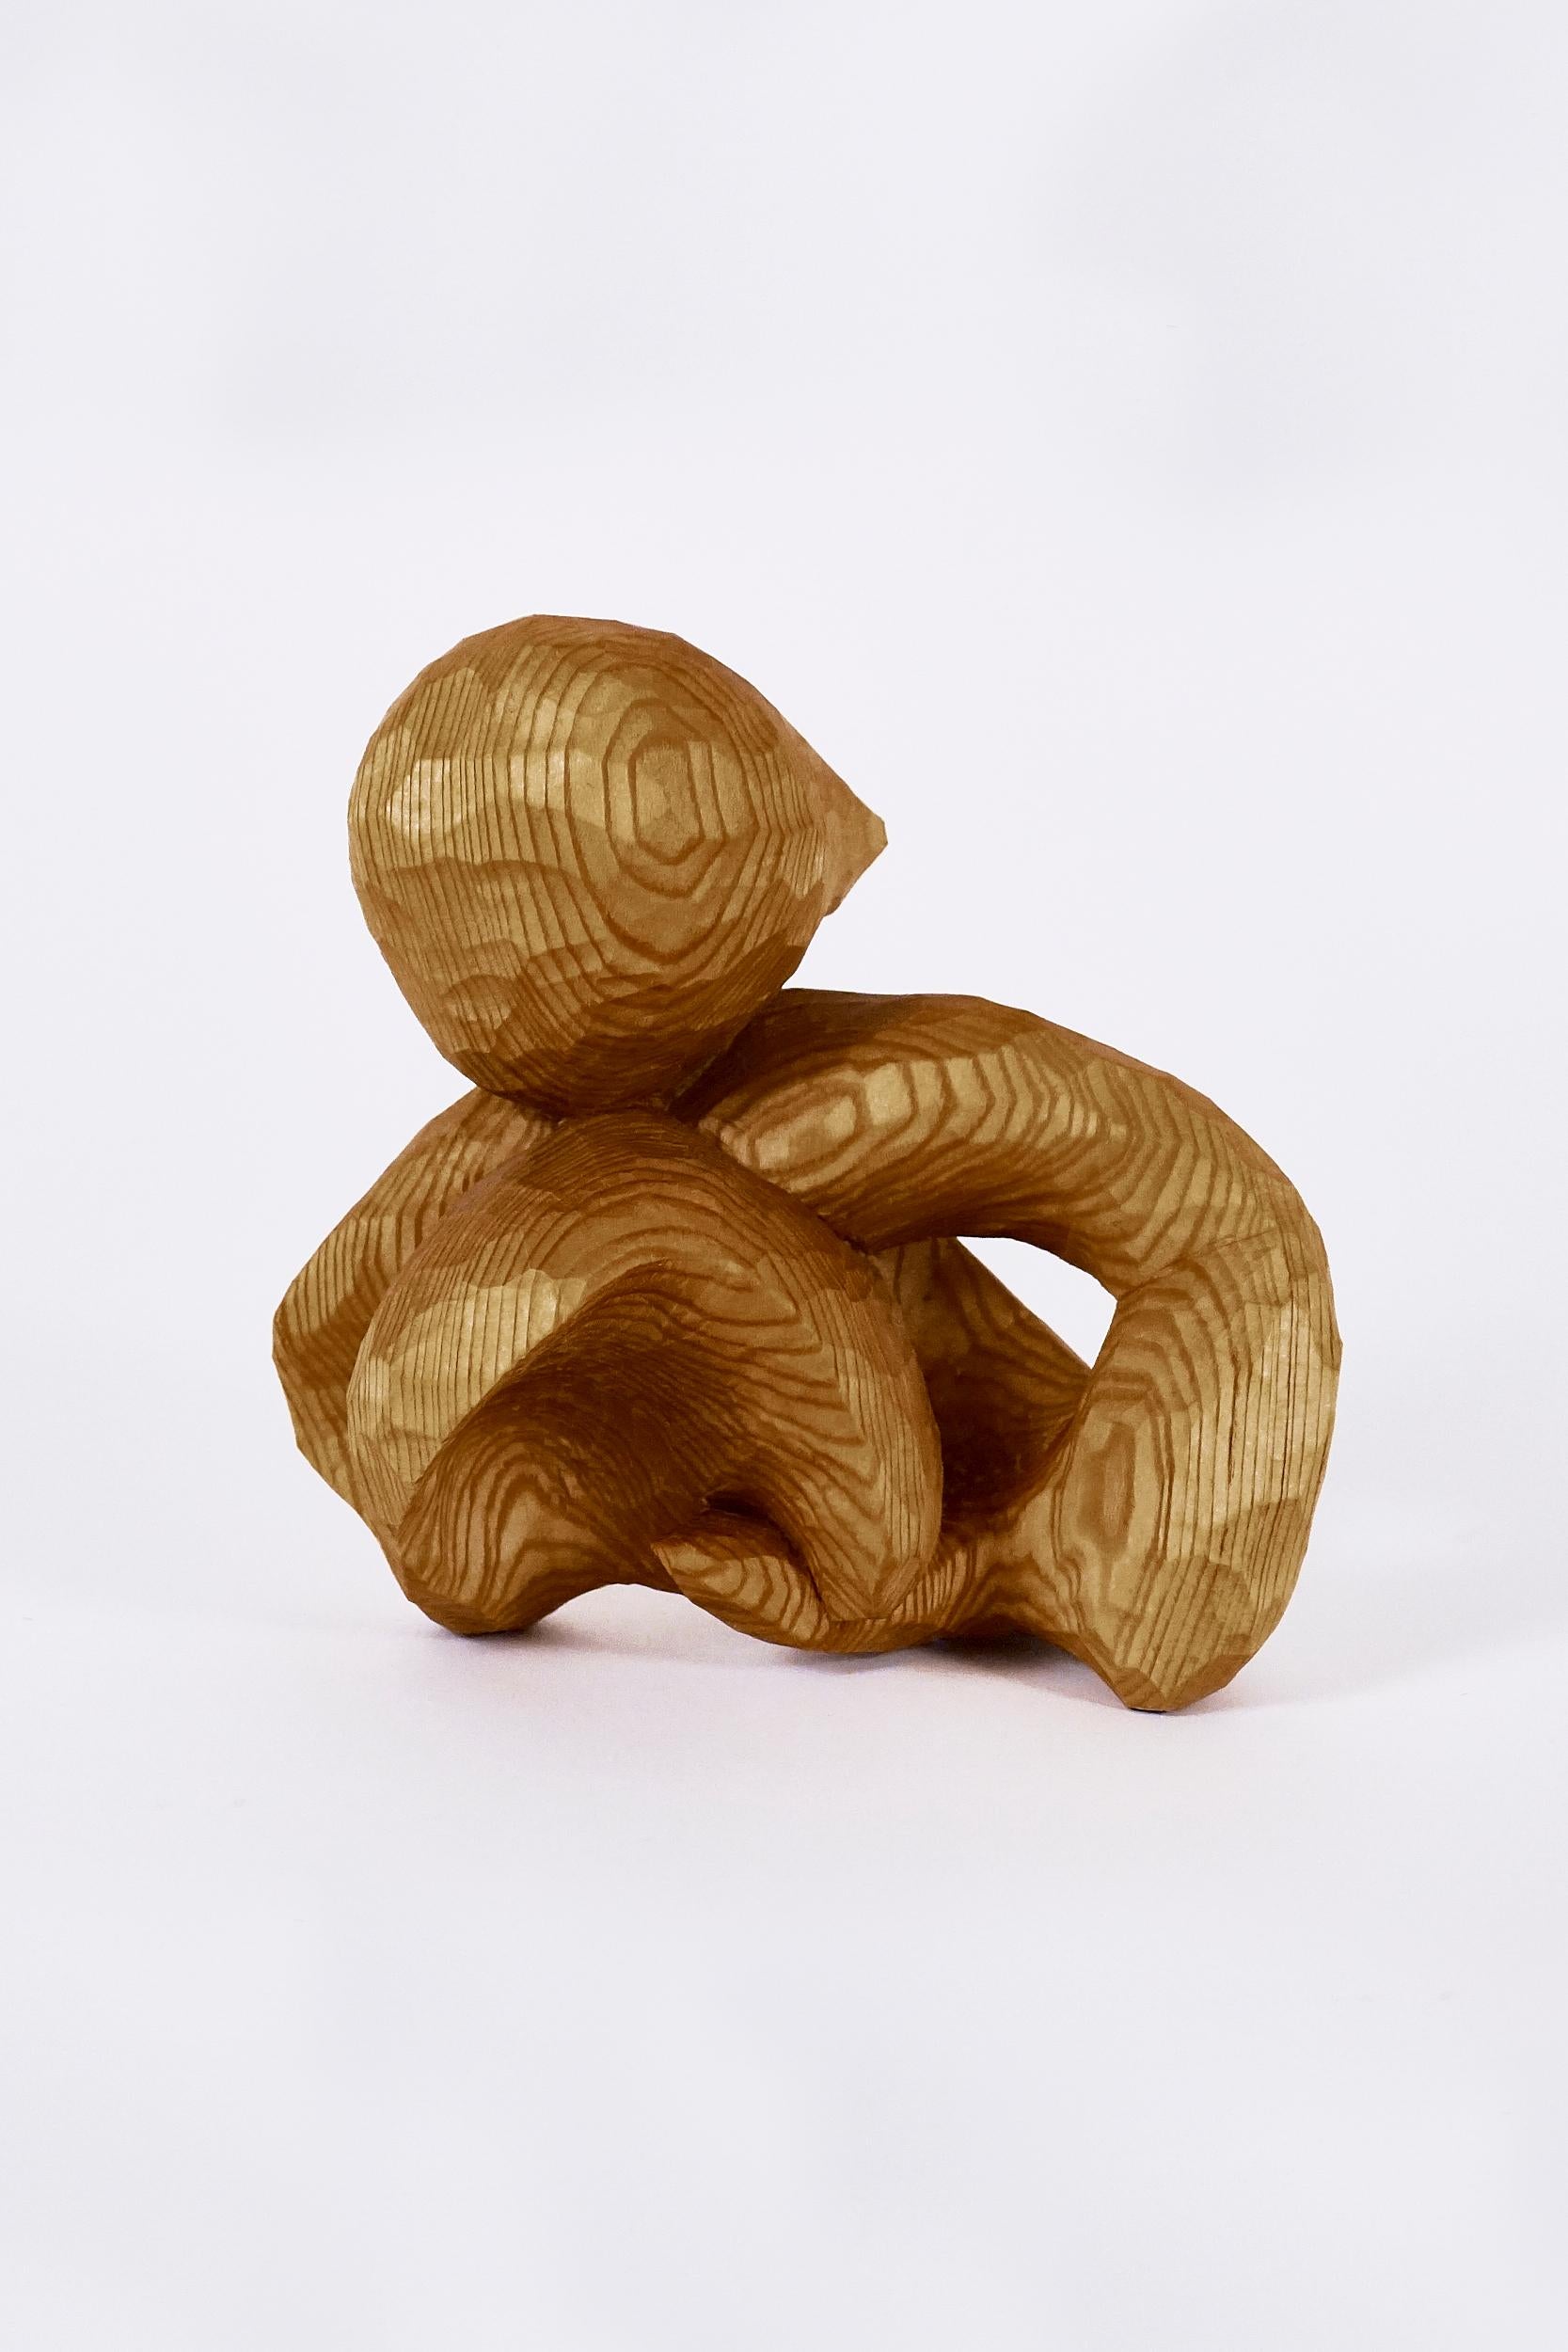 Carved Investigation Ten, Carved wood sculpture - Brown Abstract Sculpture by Jared Abner